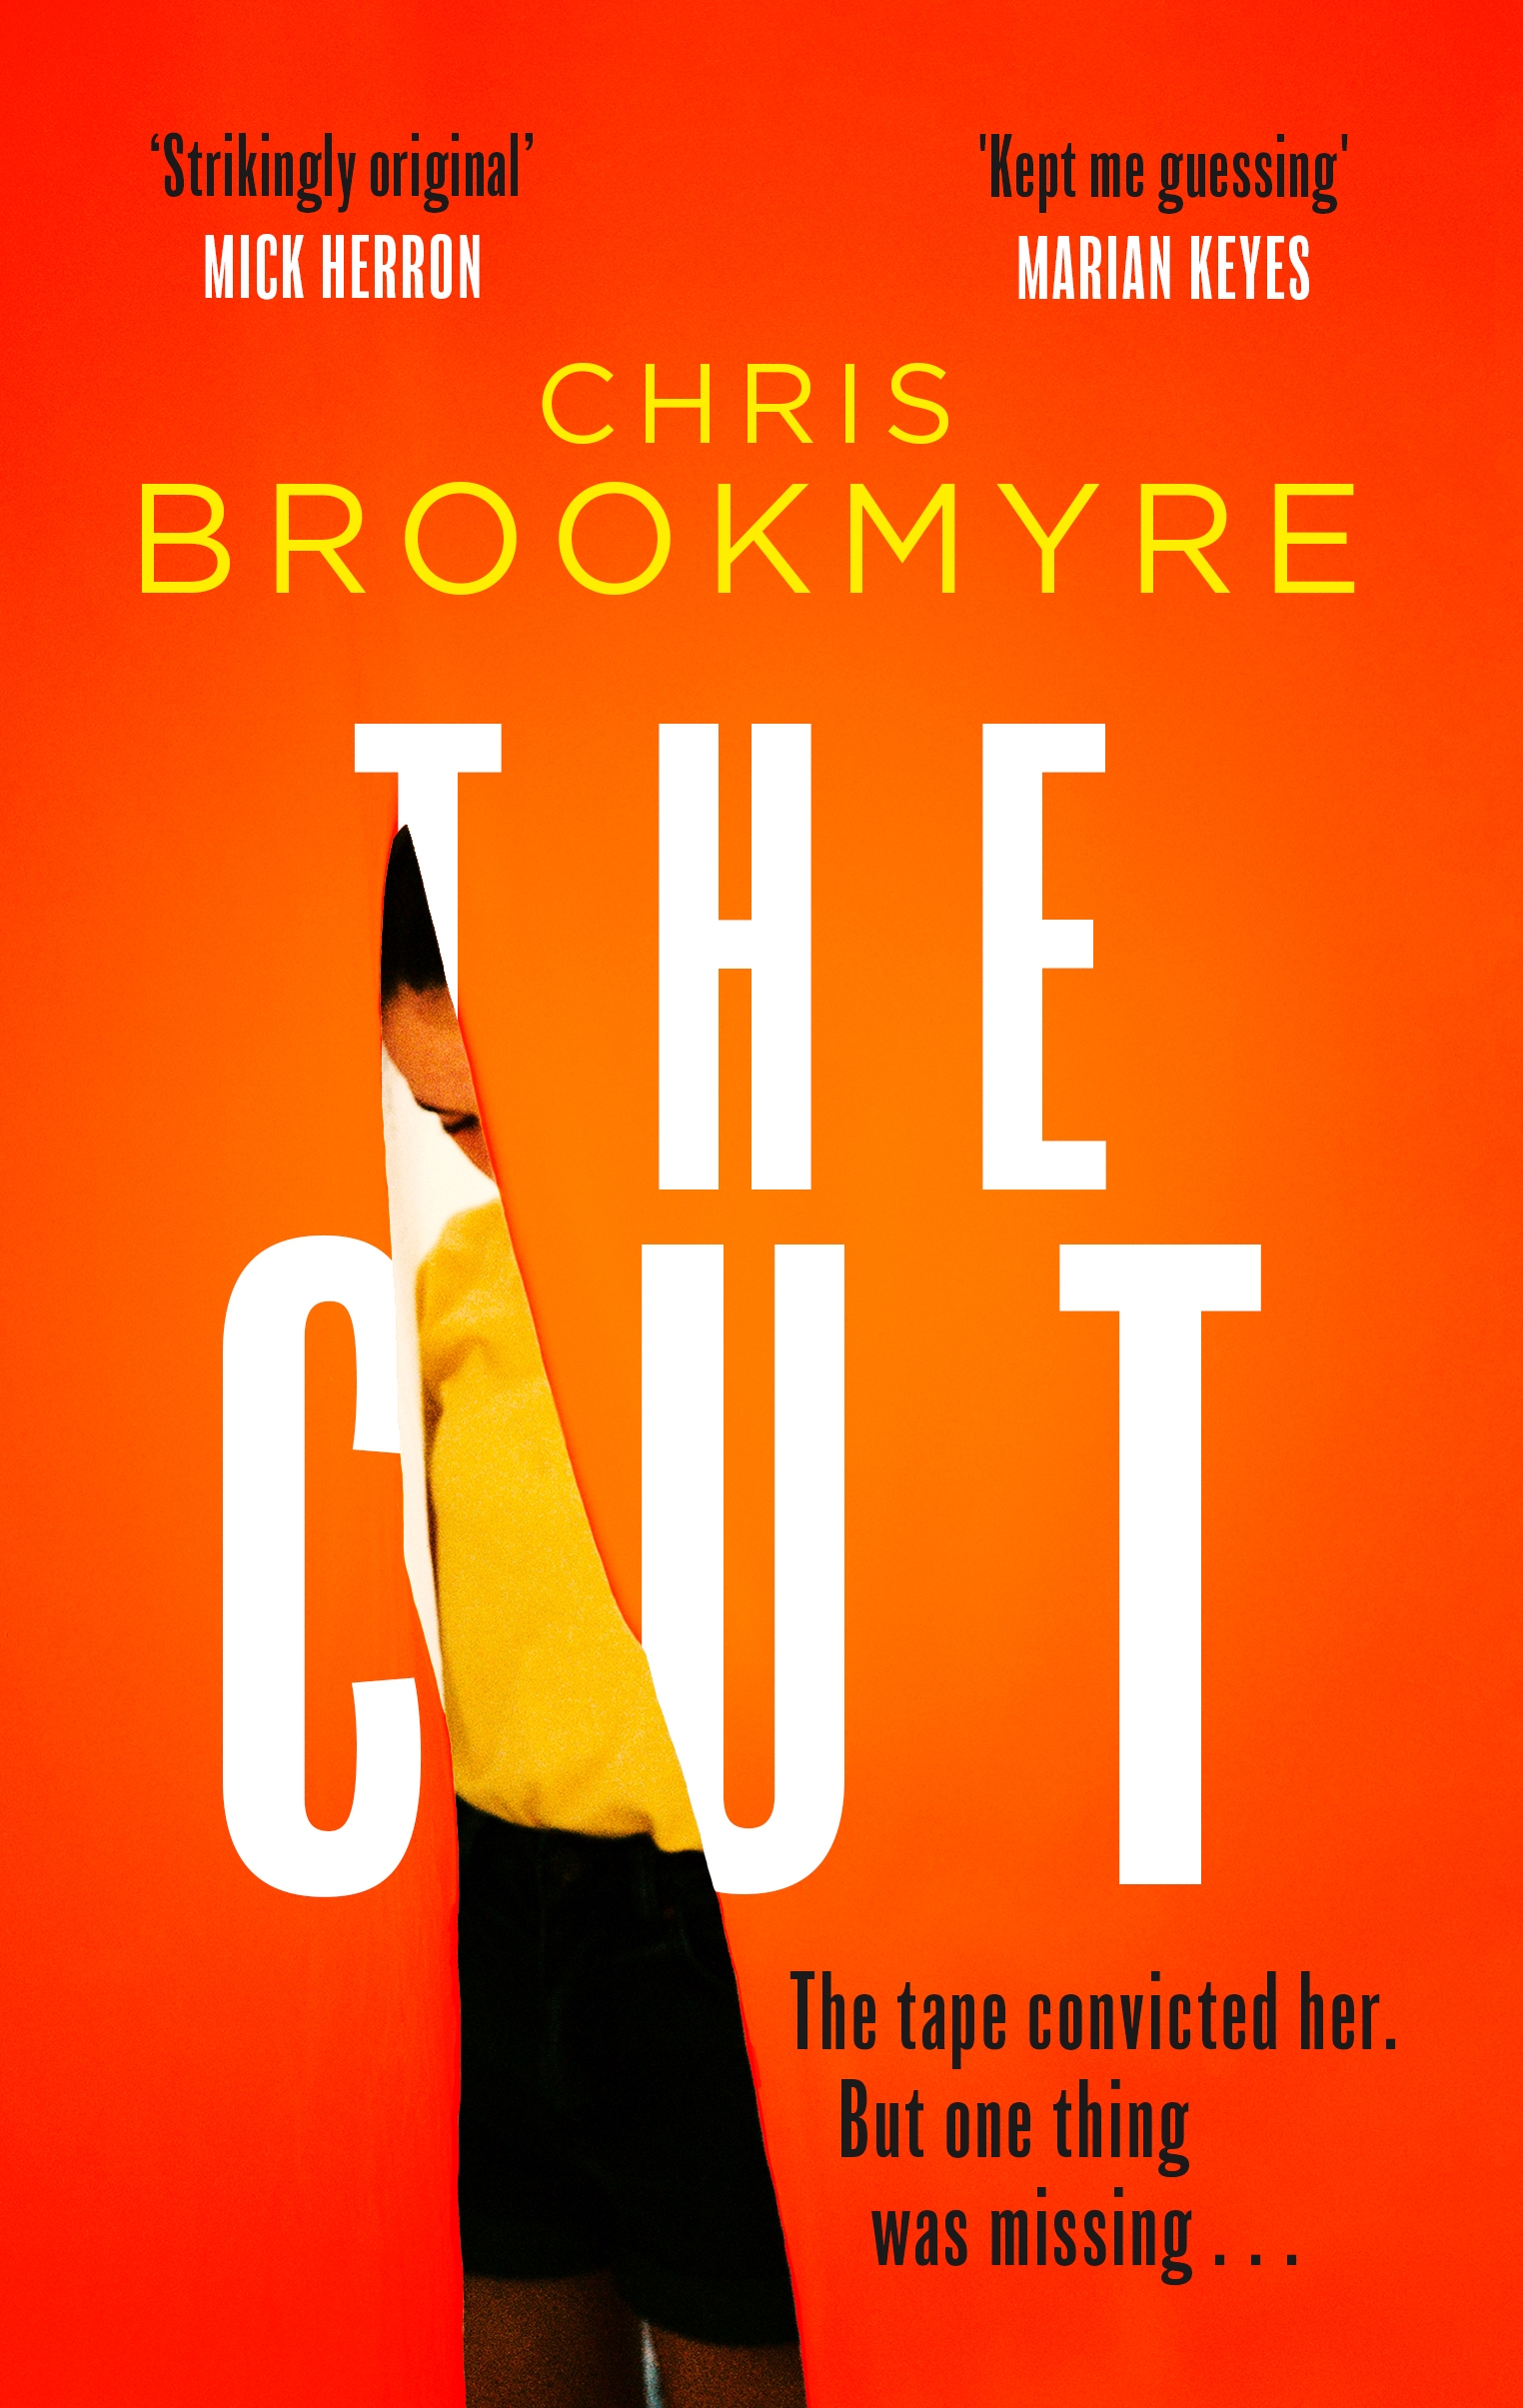 Chris Brookmyre's The Cut book cover